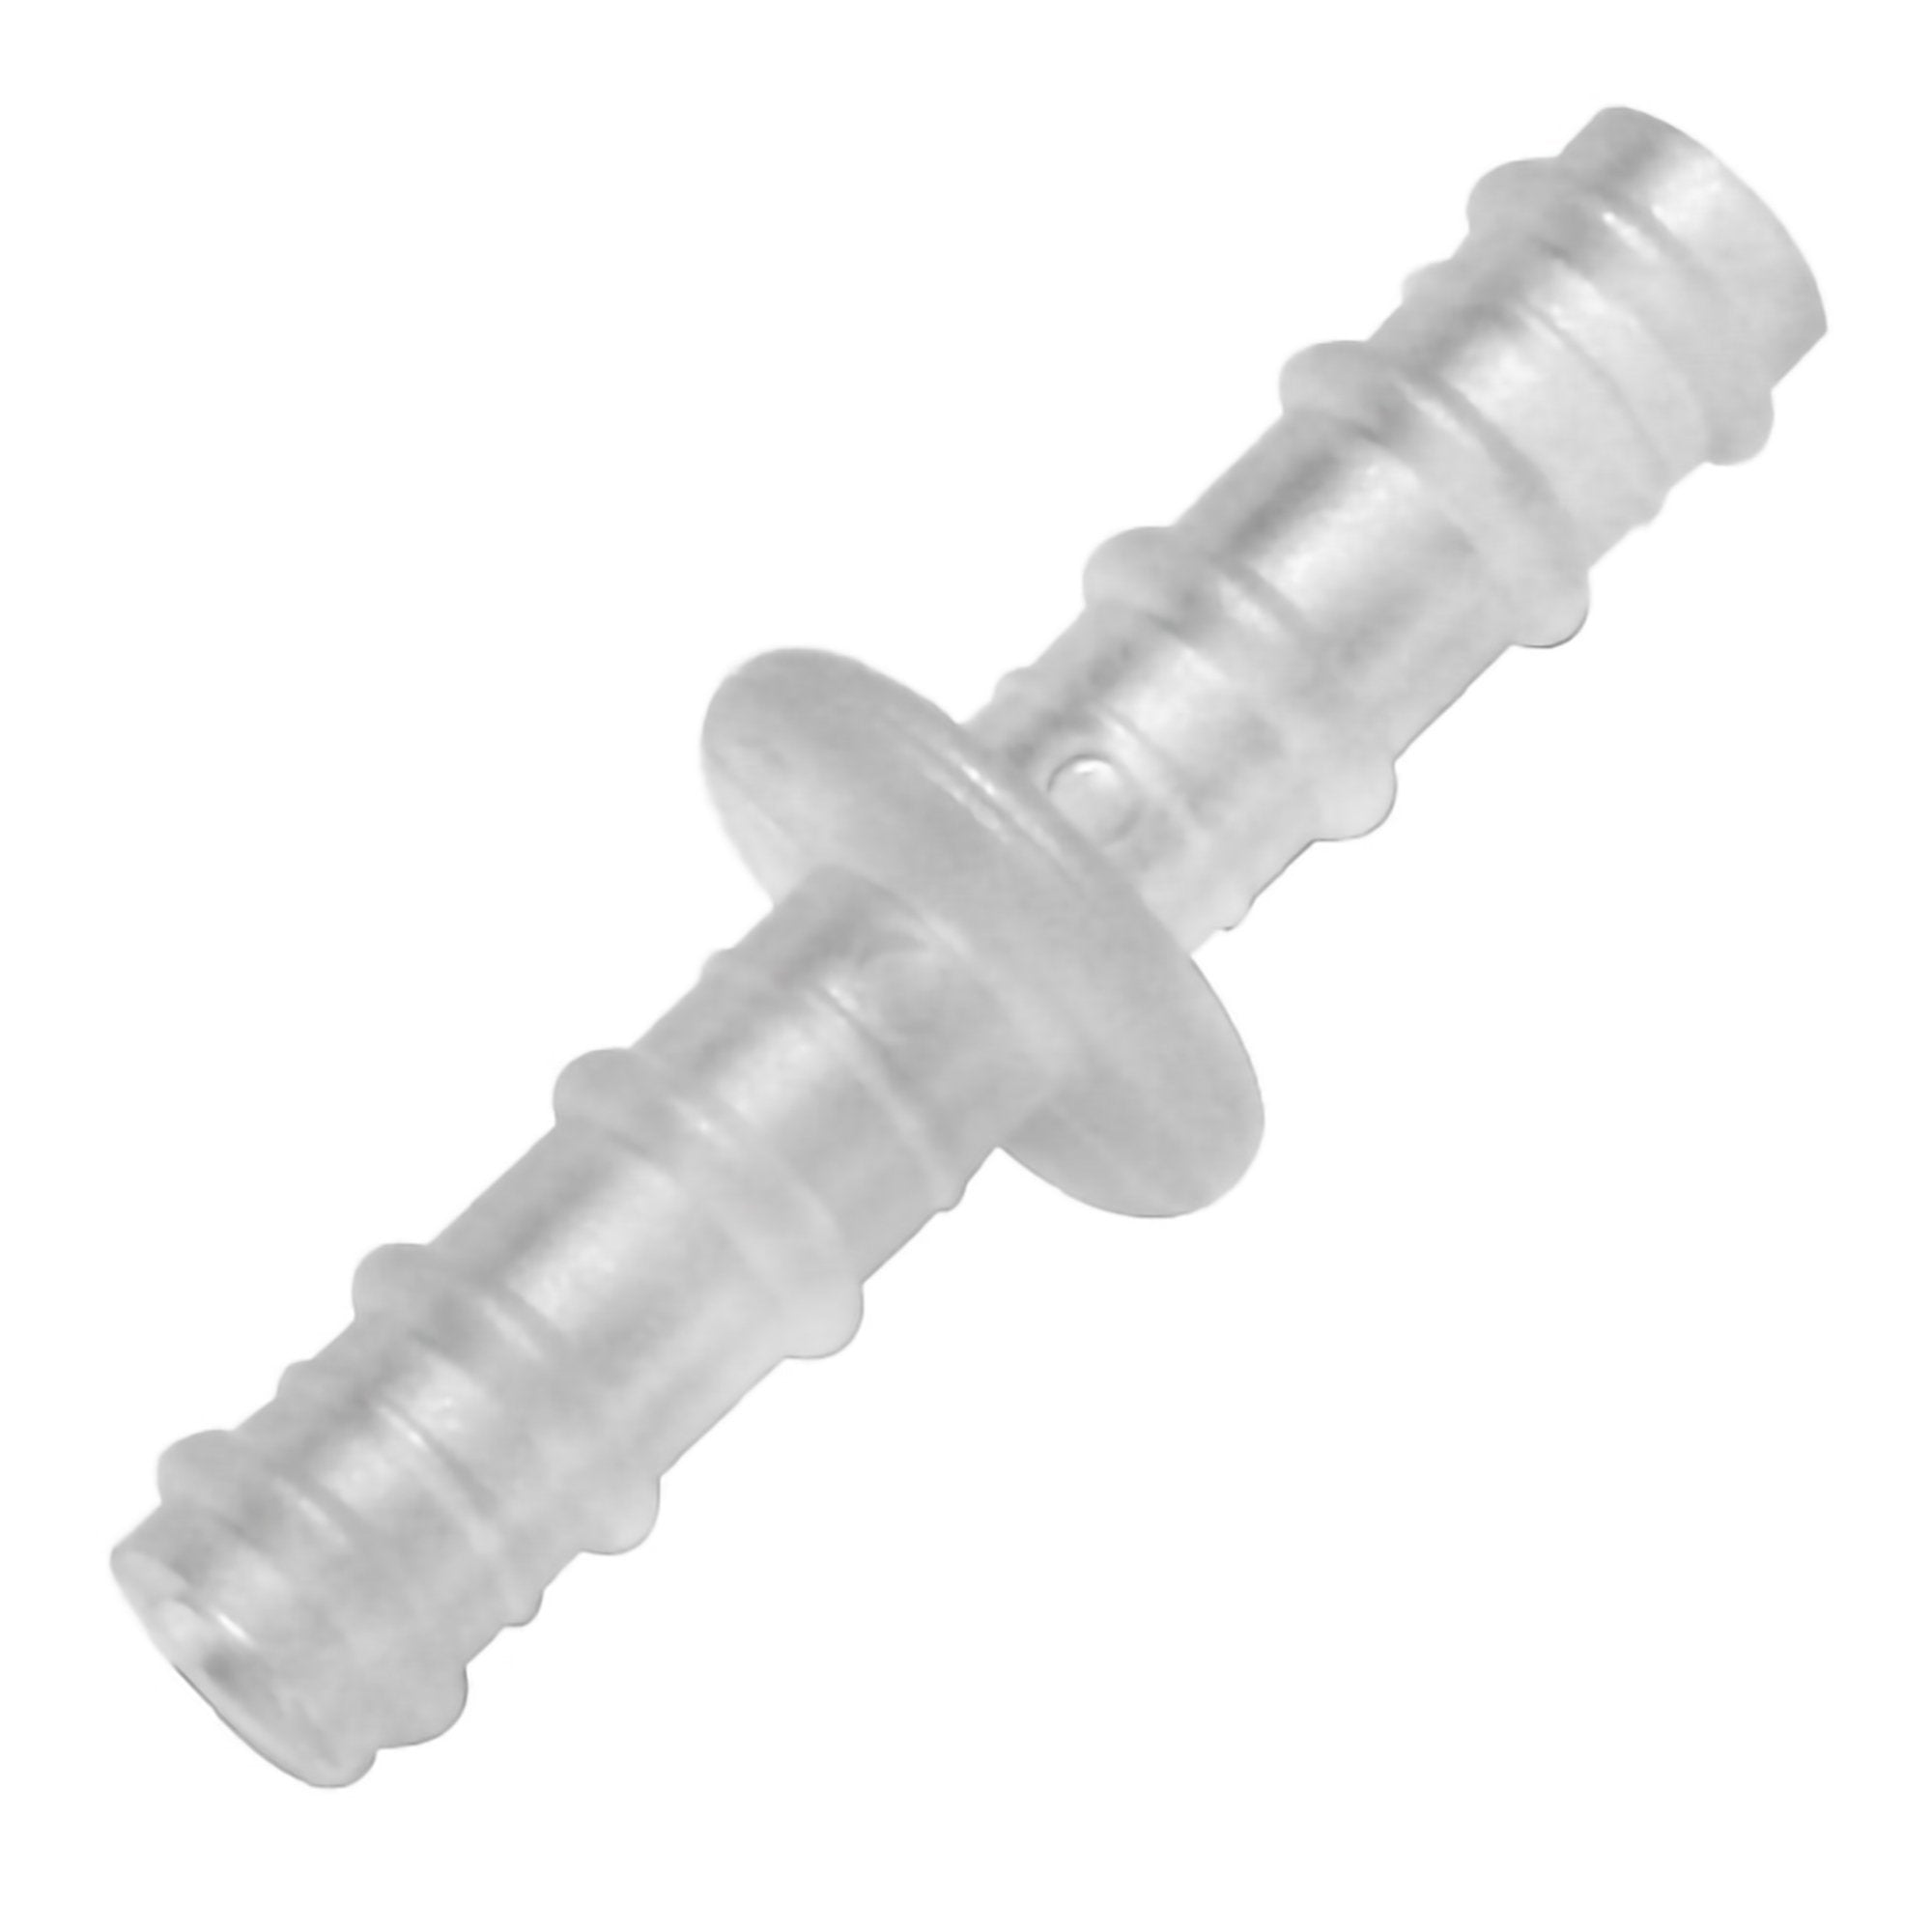 Oxygen Tubing Connector